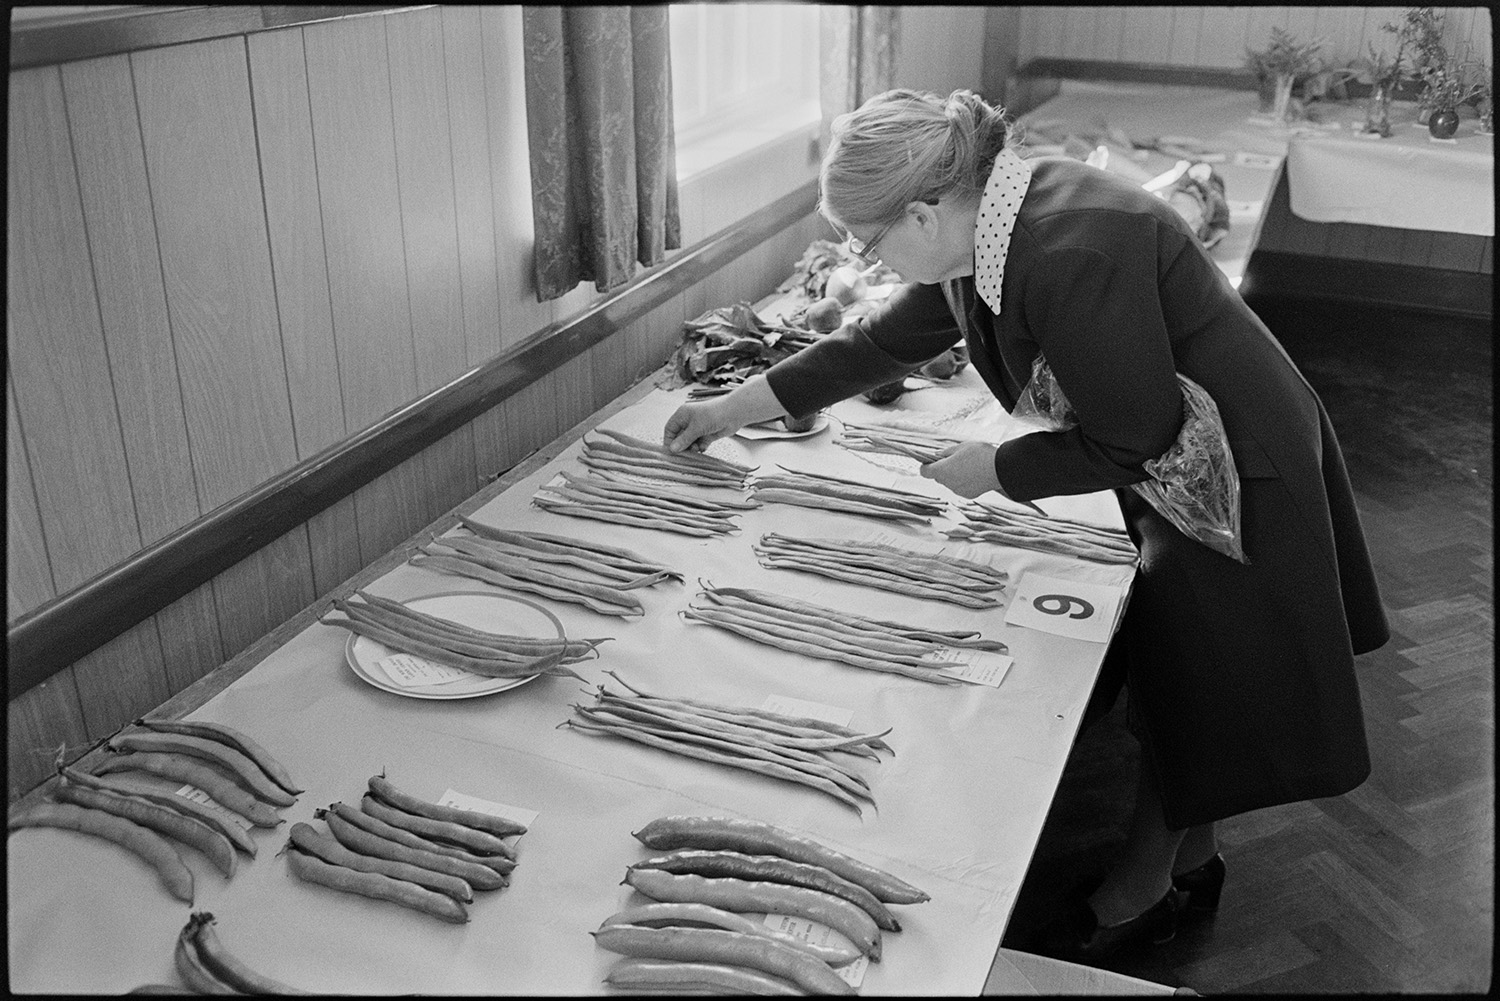 Vegetables, produce and cakes at flower show in village hall, French beans, onions, flowers.
[Woman arranging an exhibit of runner beans on a table at Dolton Flower Show, in Dolton Village Hall.]